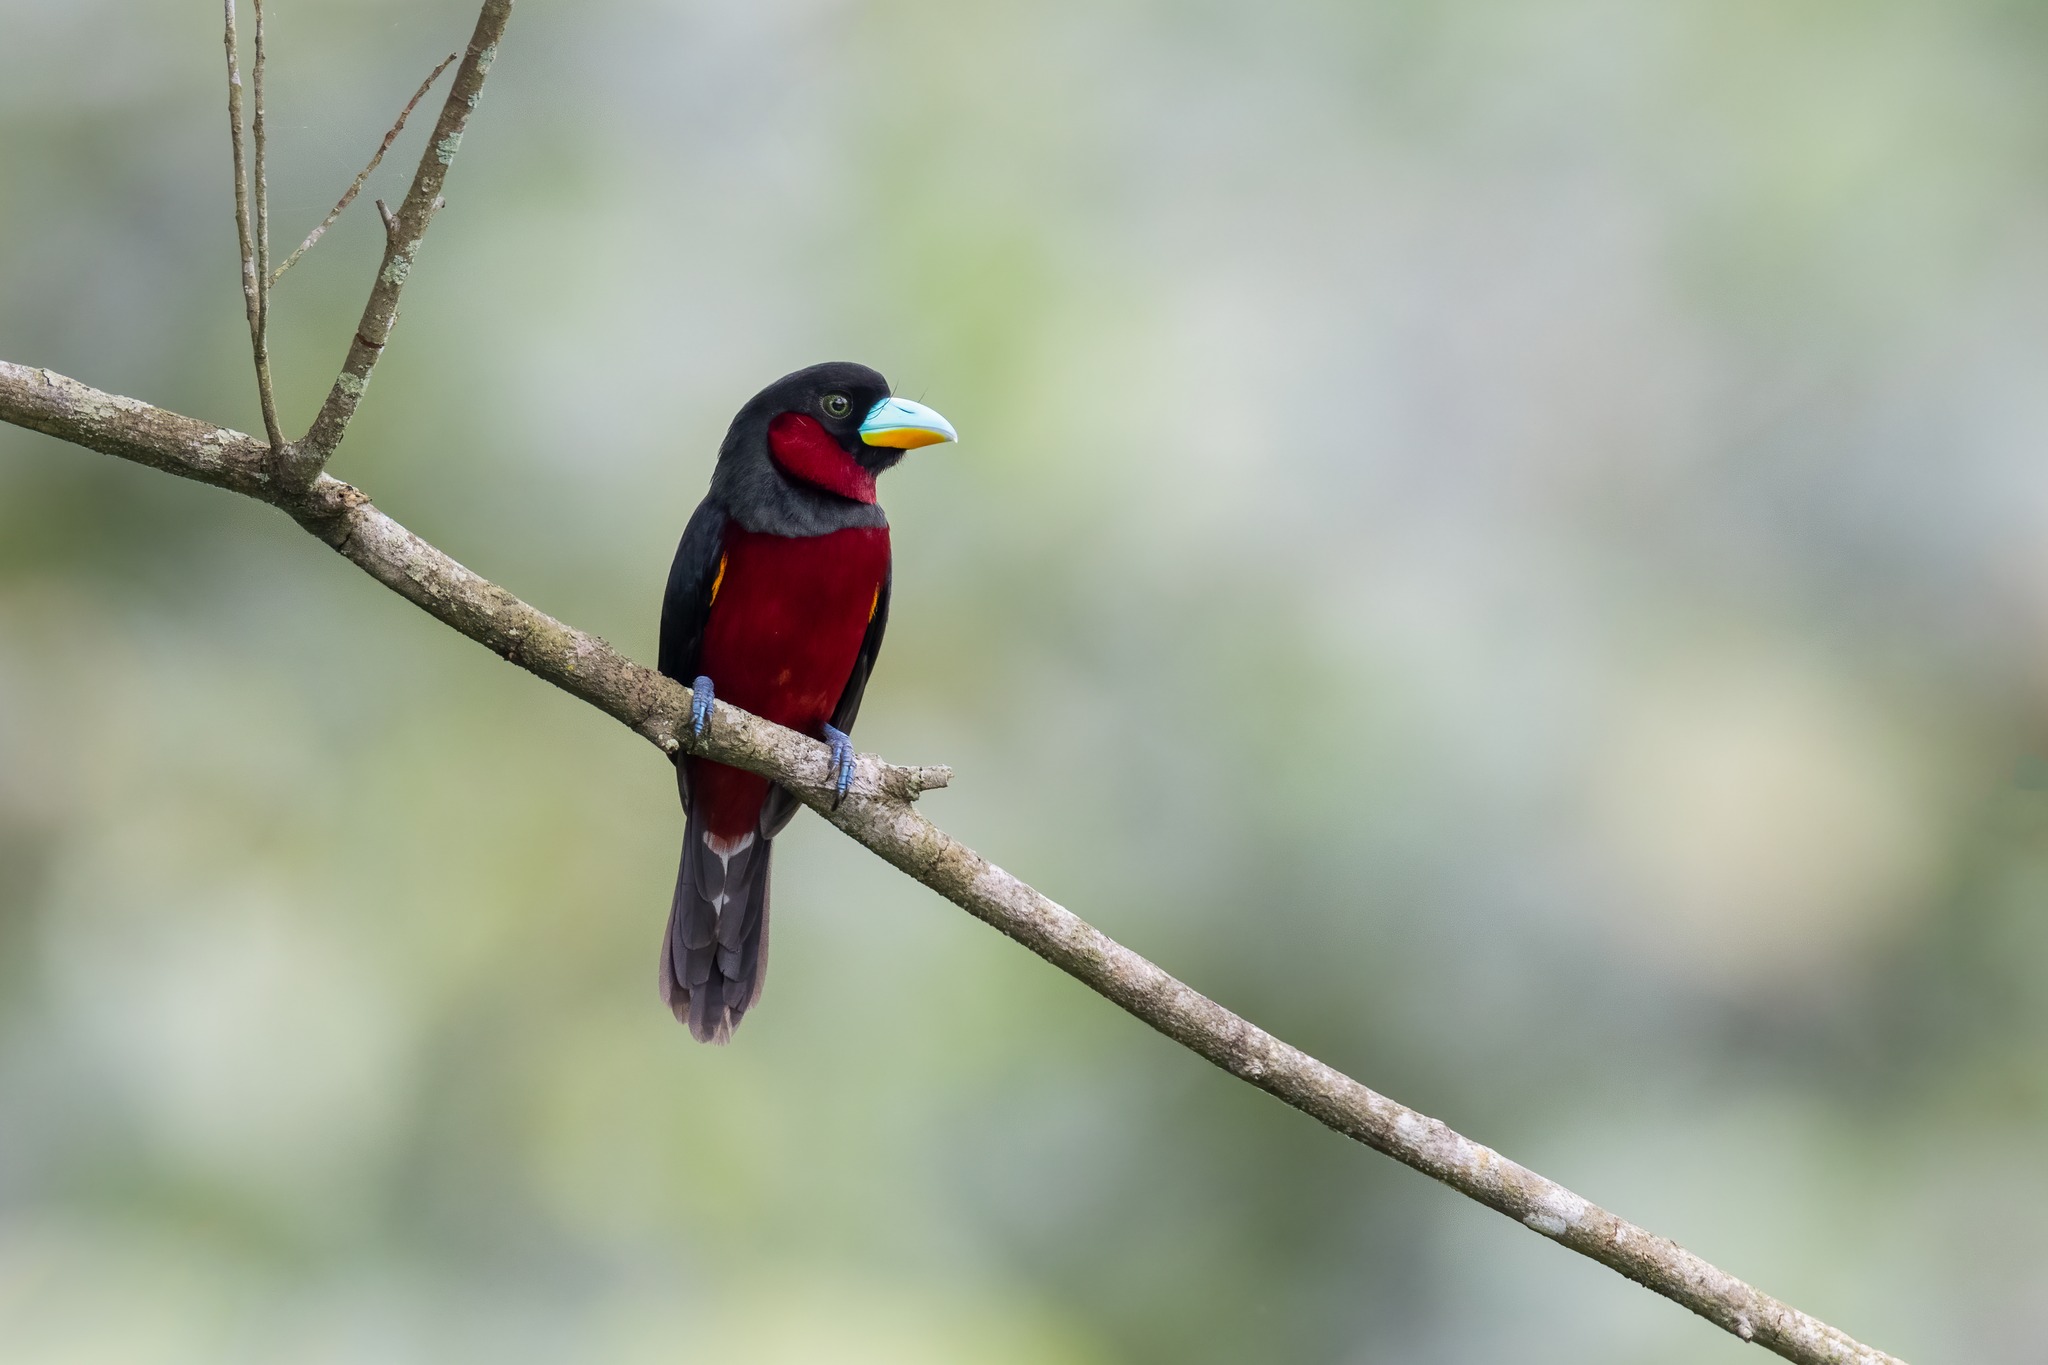 Black-and-red Broadbill at Sungei Buloh Wetland Reserve on 25 Feb 2023. Photo credit: Adrian Silas Tay